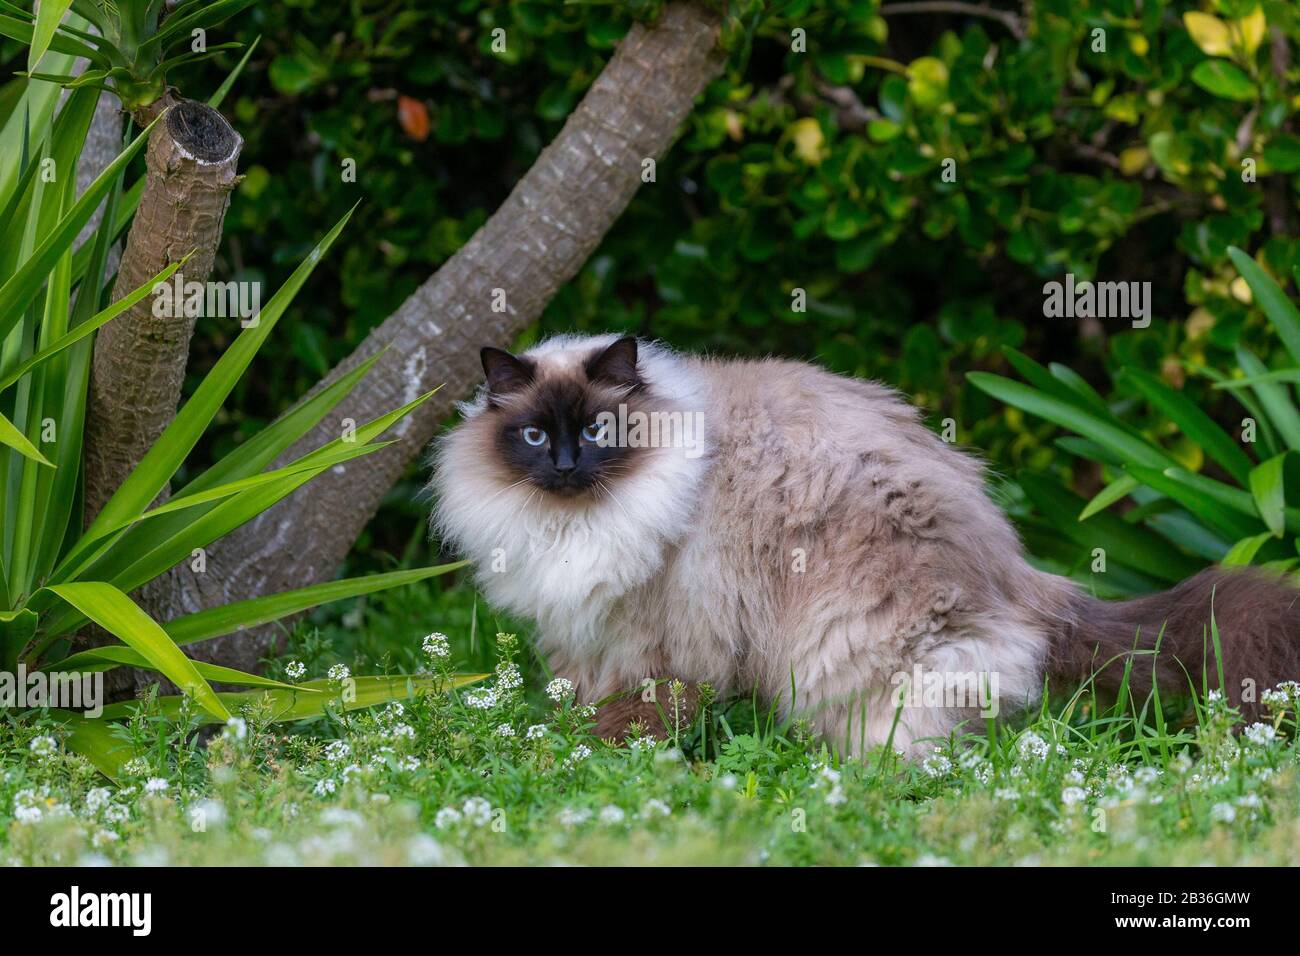 France Finistere Domestic Cat No Purebred A Little Siamese Looks Like A Burmese Cat Stock Photo Alamy